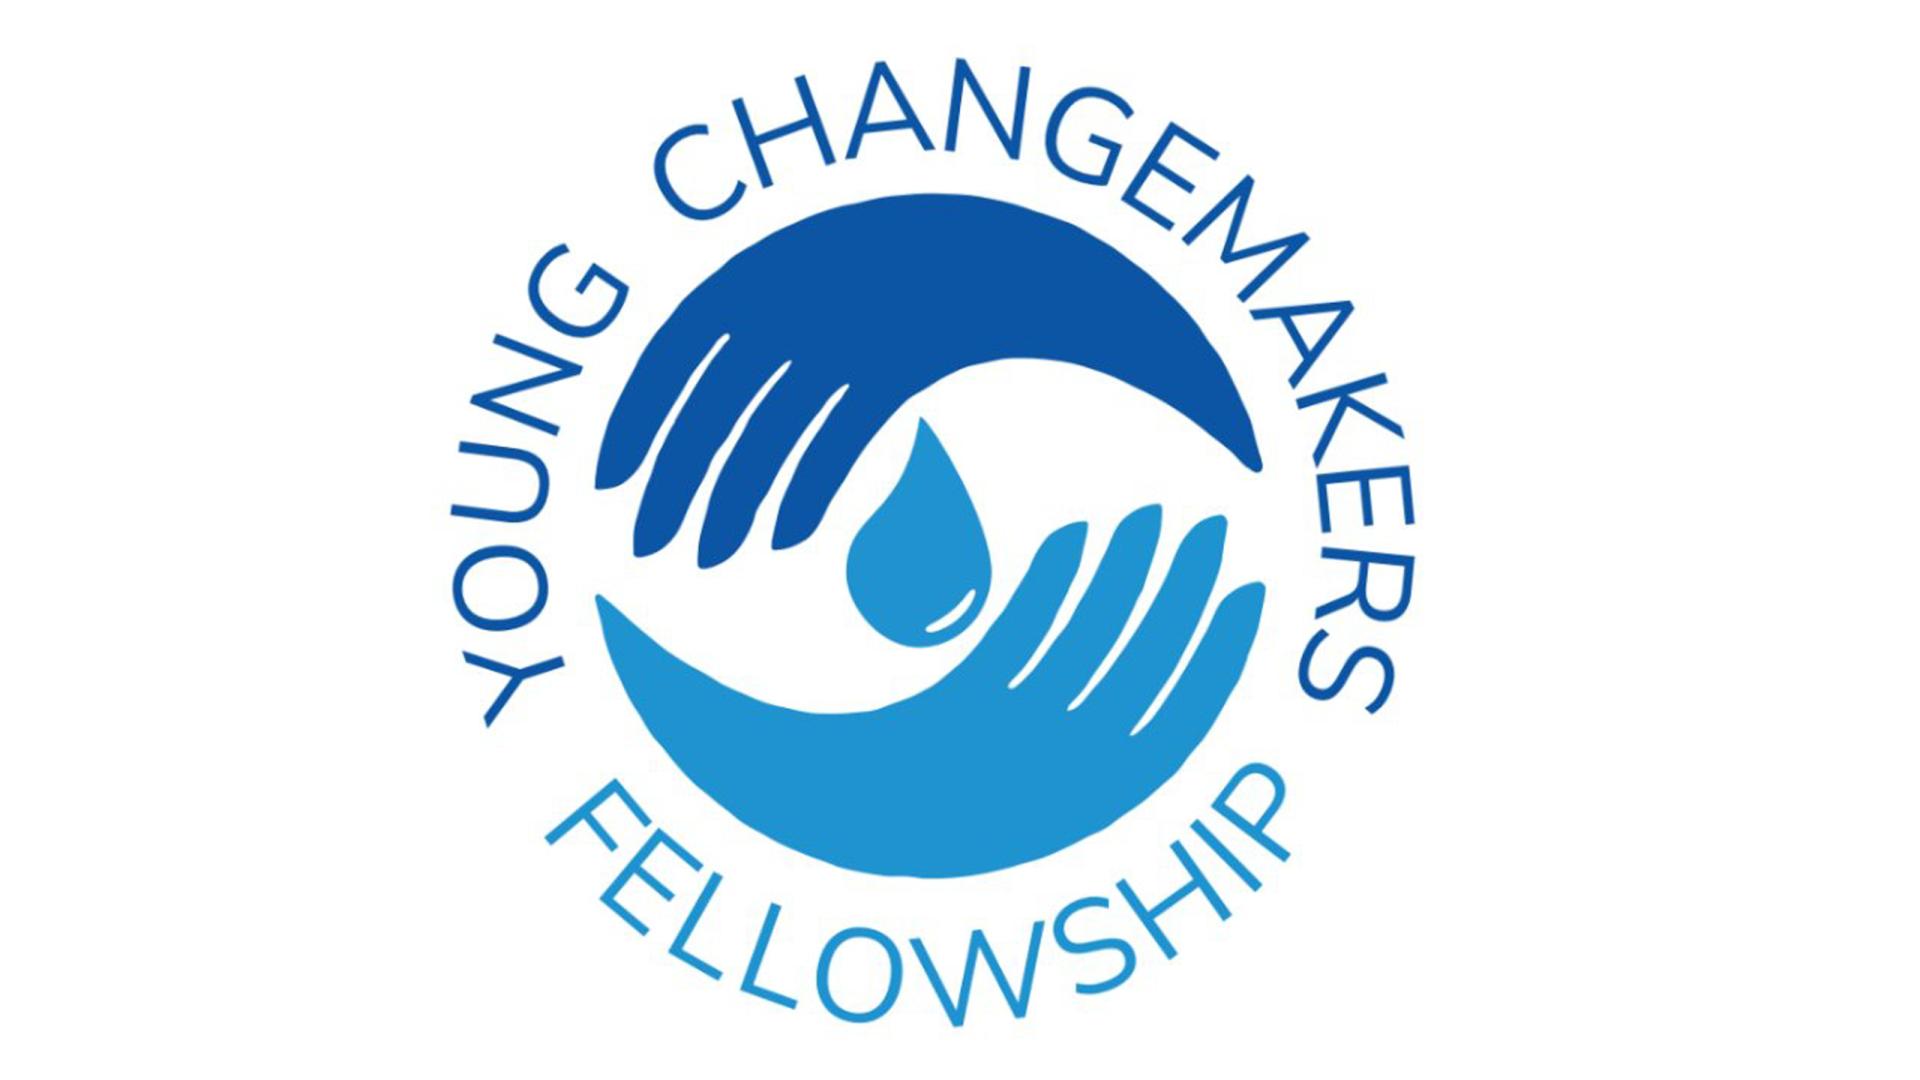 A round two-toned blue logo shows a pair of hands around a drop of water. The words that wrap around the logo read "Young Changemakers Fellowship."